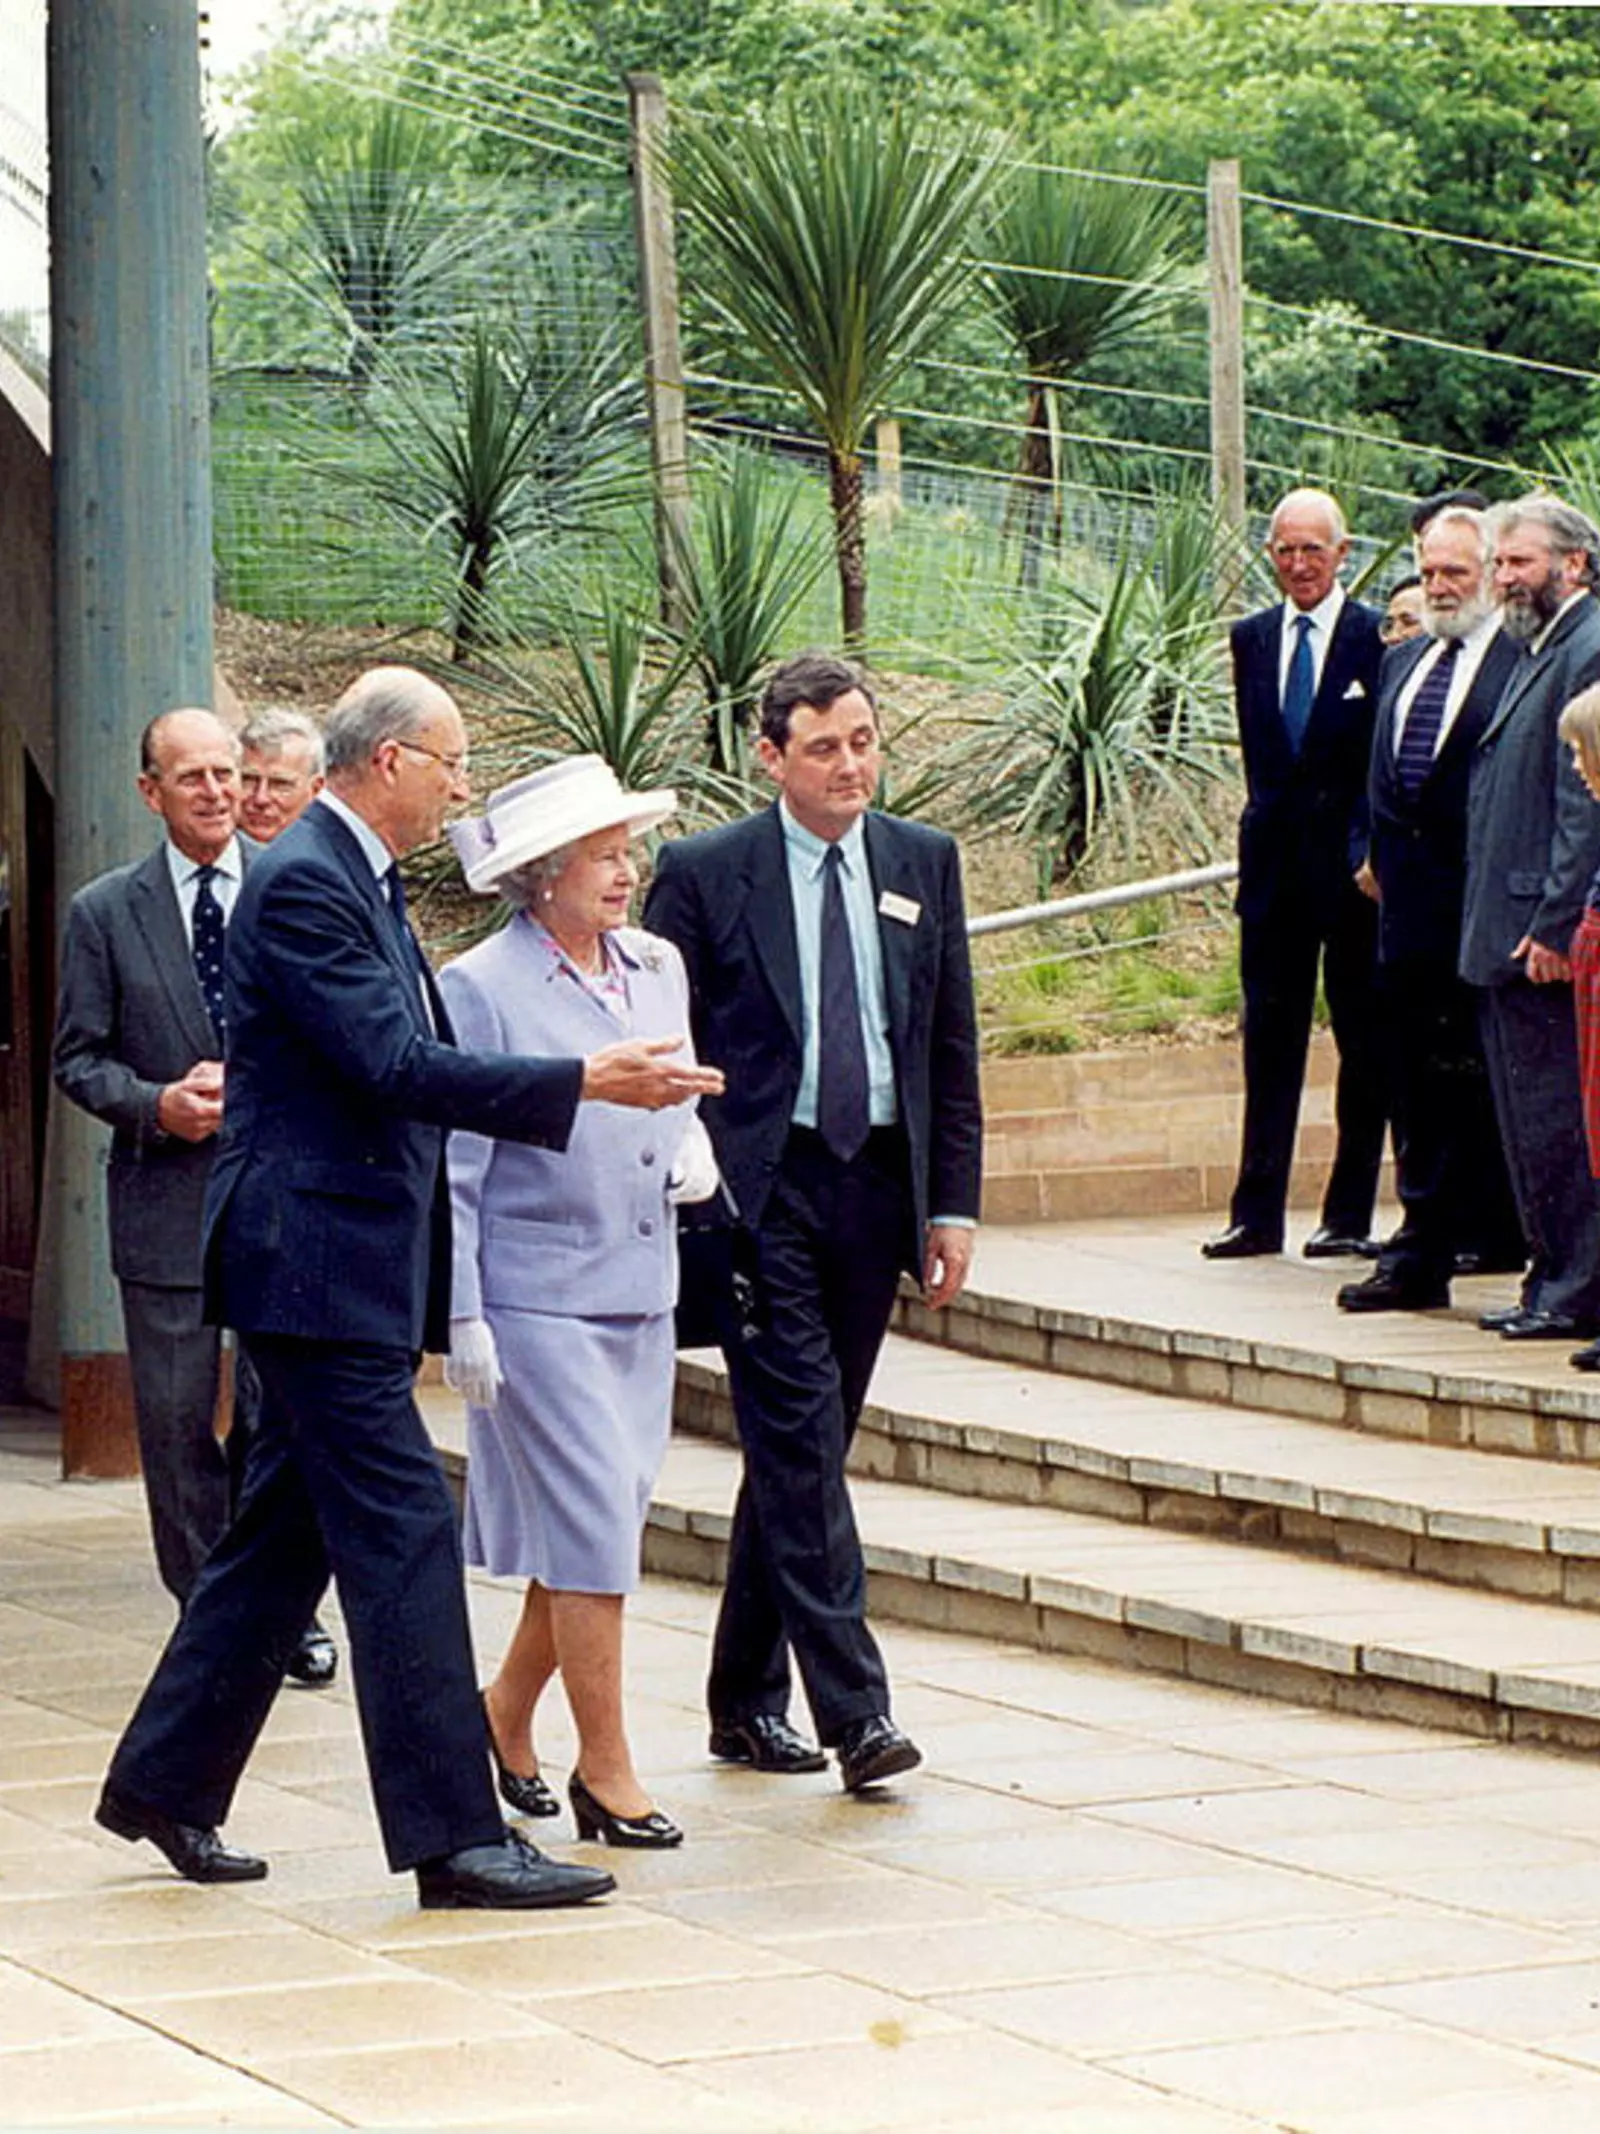 Tiny Giants at London Zoo was officially opened by Her Majesty The Queen and His Royal Highness The Duke of Edinburgh in 1999. 